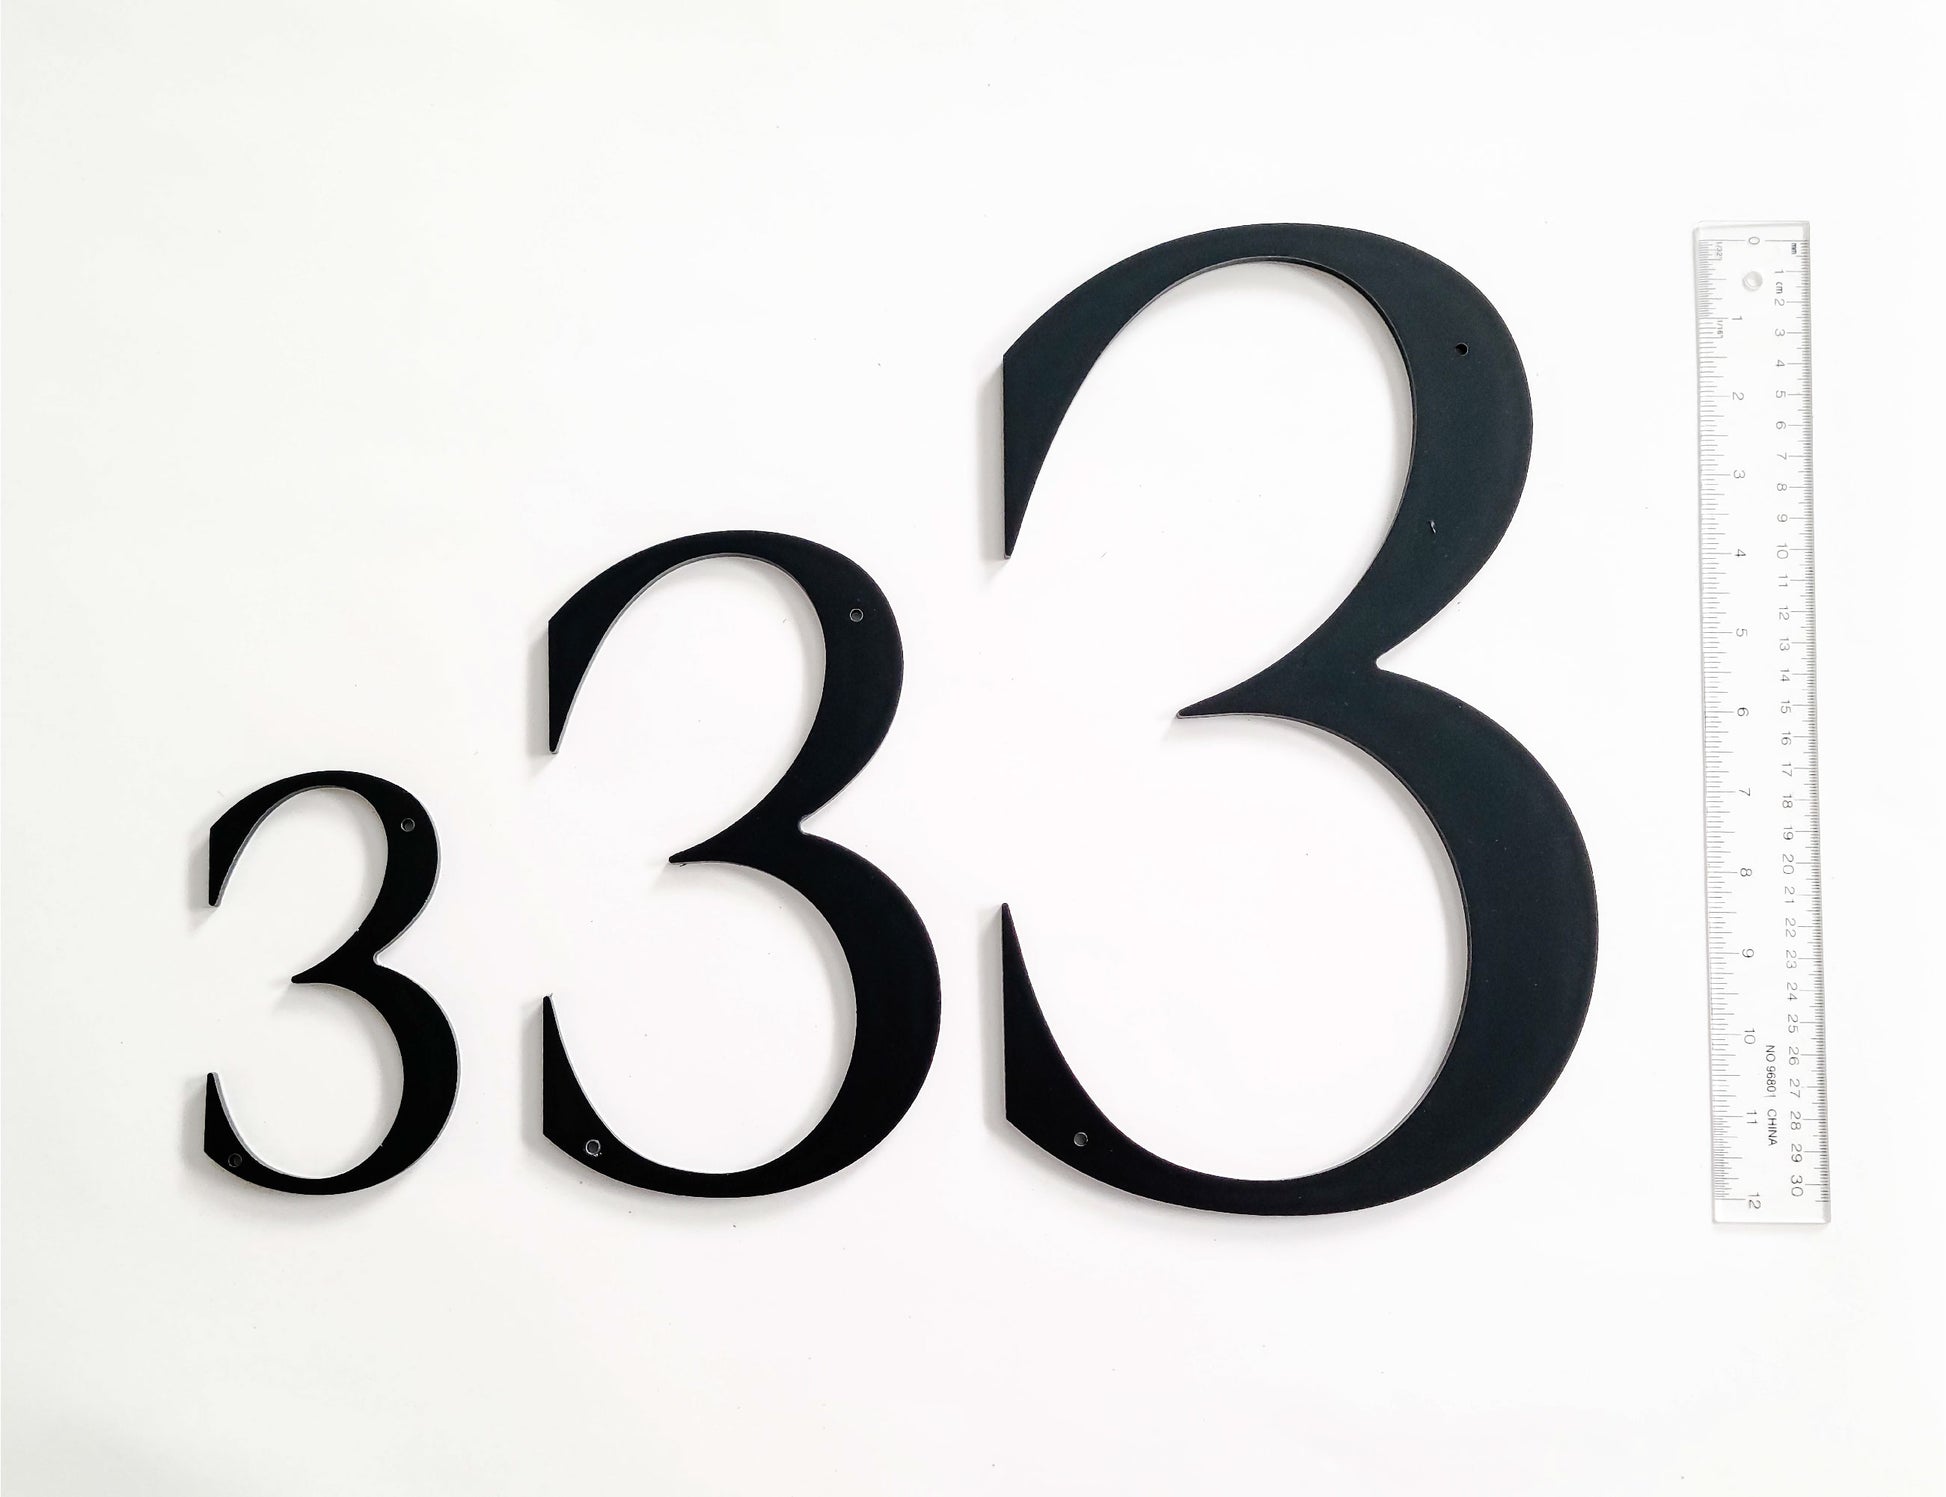 ROMAN SERIF house numbers in 3 sizes